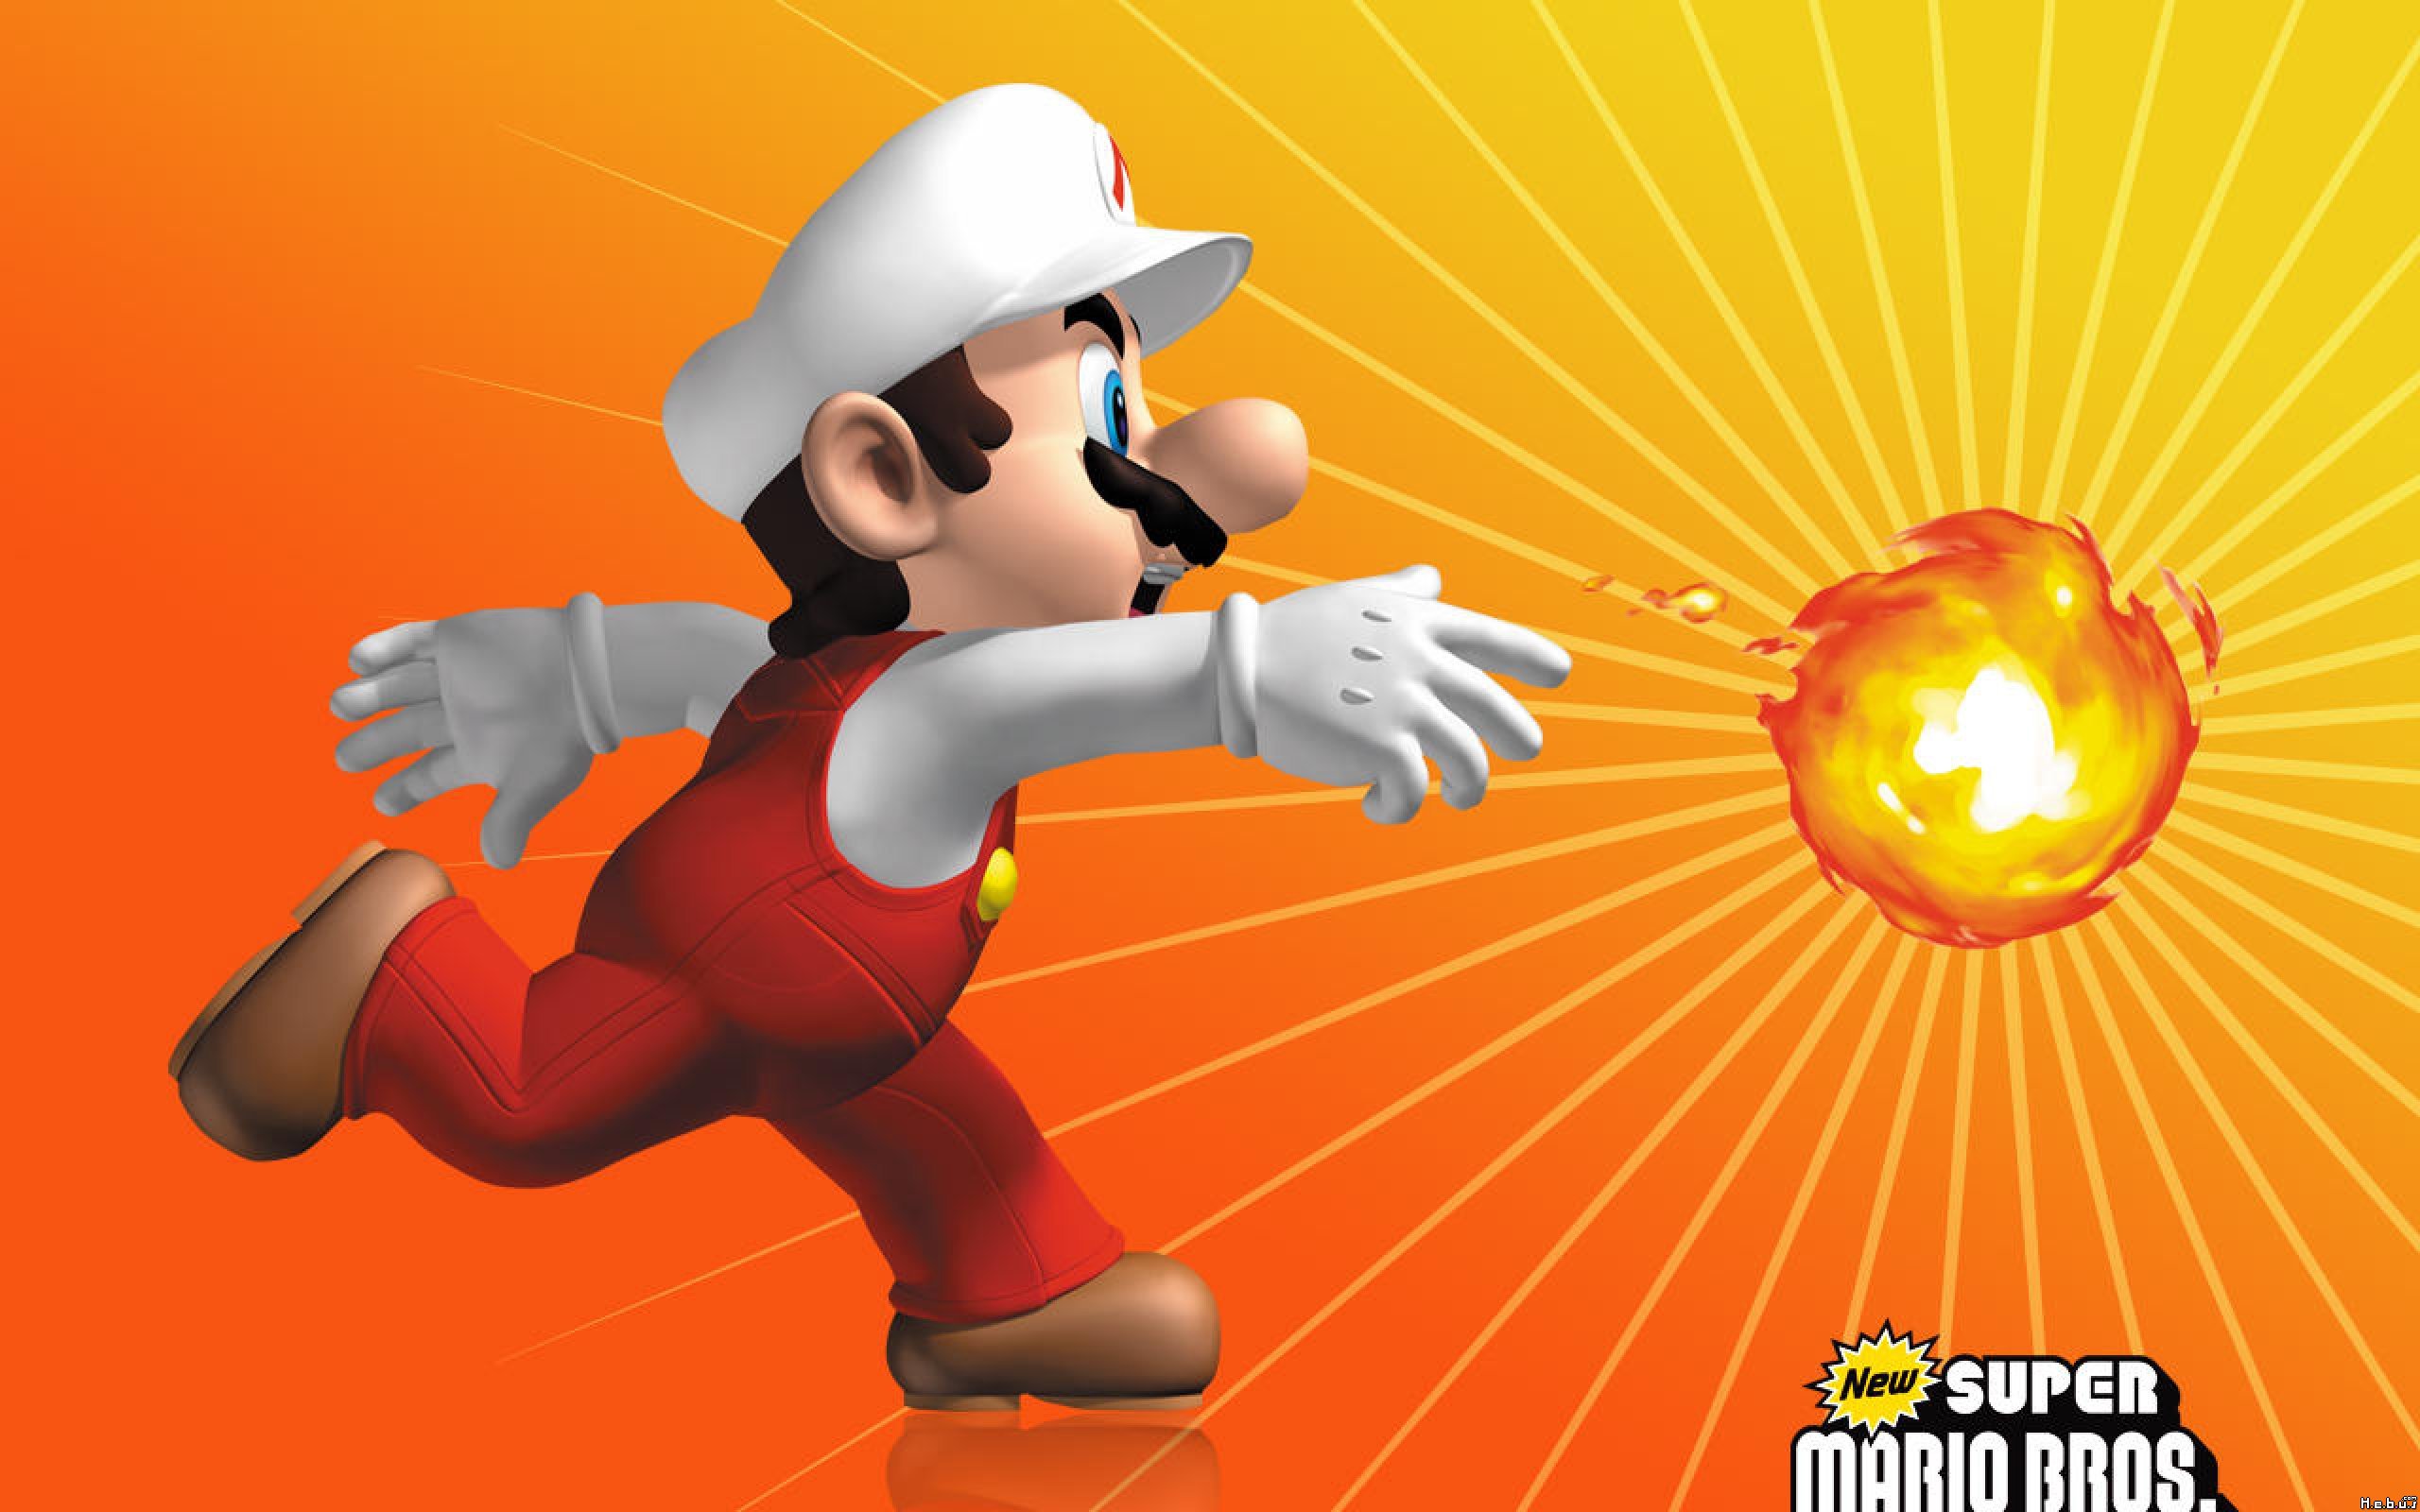 Video Game New Super Mario Bros. HD Wallpaper | Background Image